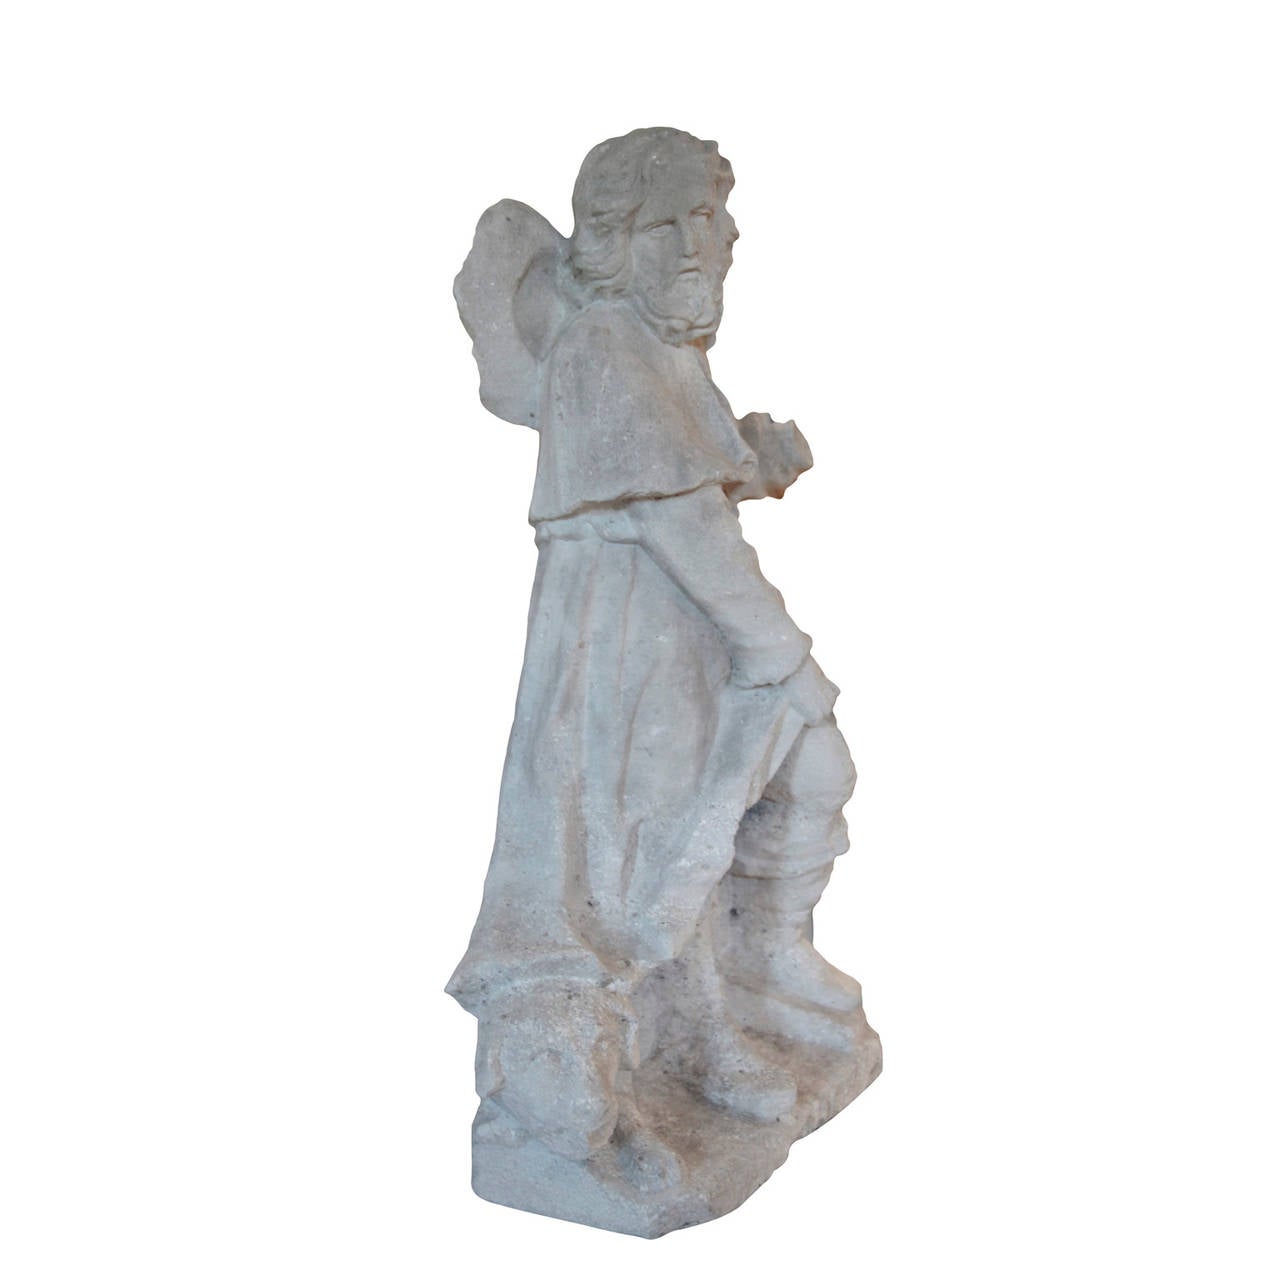 Elegant Austrian Sandstone Statue of Saint Roch from the 18th Century.
Positioned in animated contrapposto with free leg and supporting leg.
Depicted with his attributes: dog with bread, pilgrim’s hat and wound at the thigh.
Head with bearded